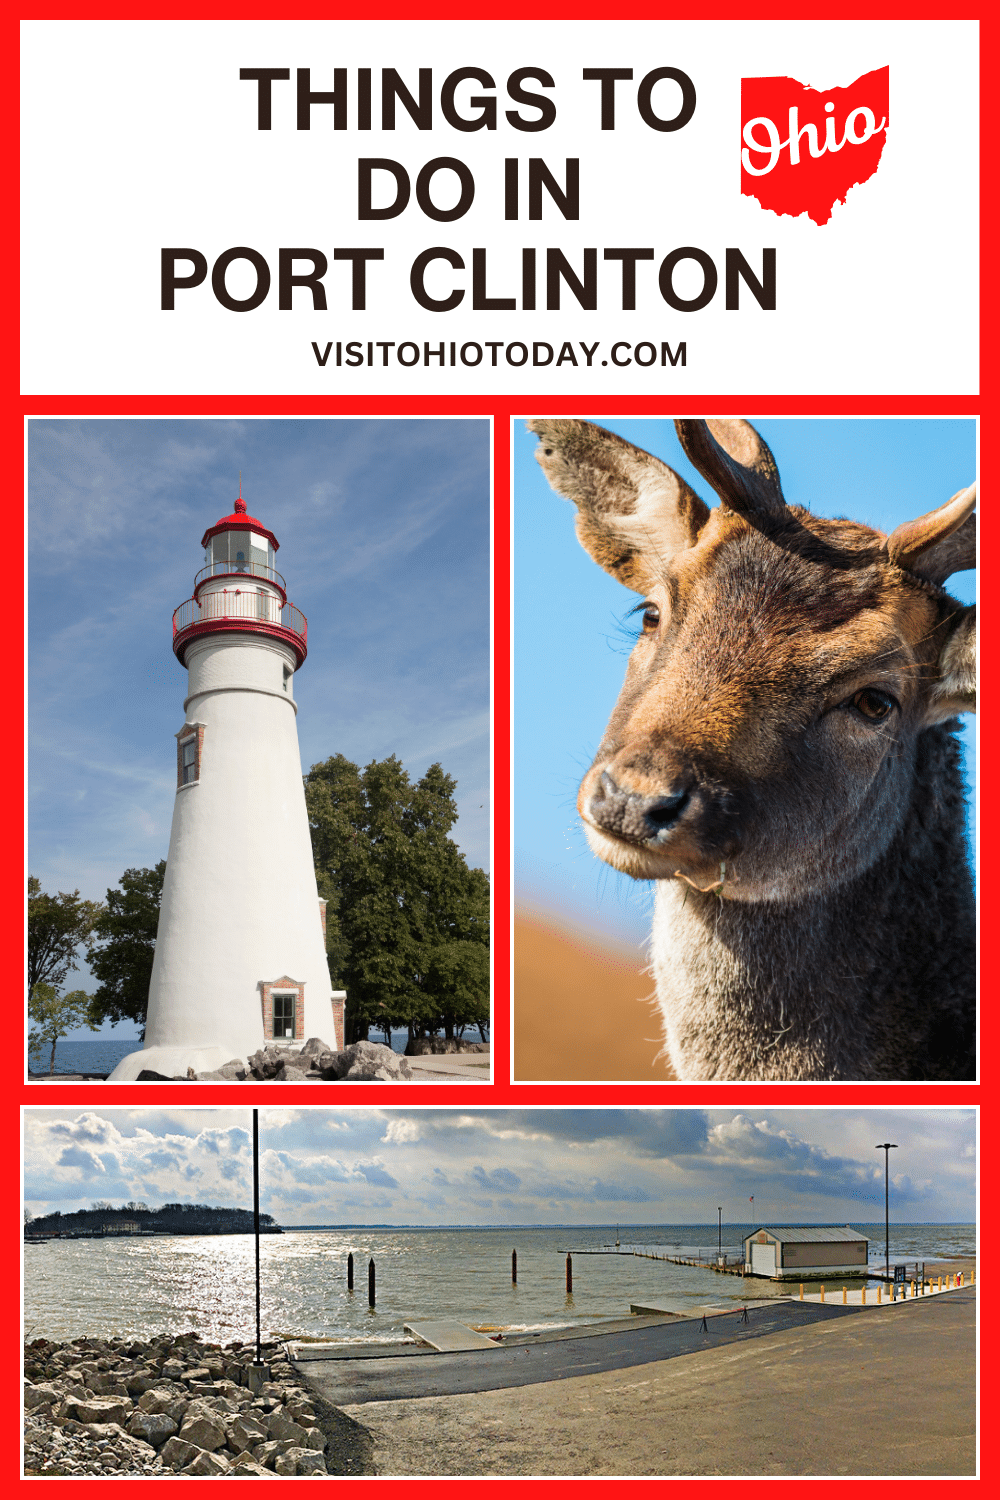 Port Clinton Ohio is known as the Walleye Capital of the World. It is located on the shores of Lake Erie, in Ottawa County, Ohio. Things to do in Port Clinton are often centered around the Lake and Portage River.